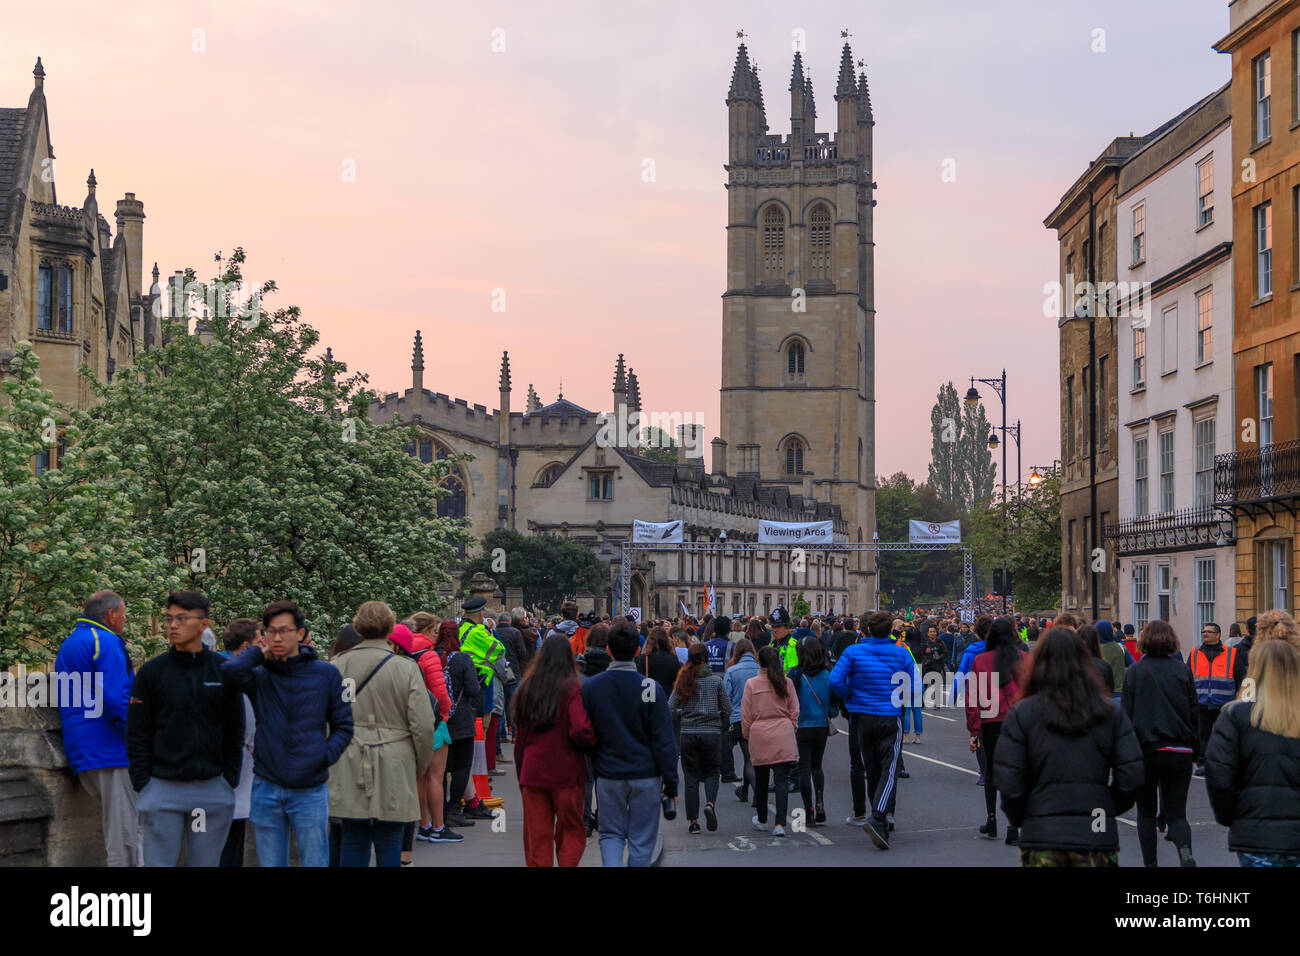 Oxford, UK. 1st May, 2019.  Crowds gather at sunrise to hear the Choir singing from the top of Magdalen College. Stock Photo